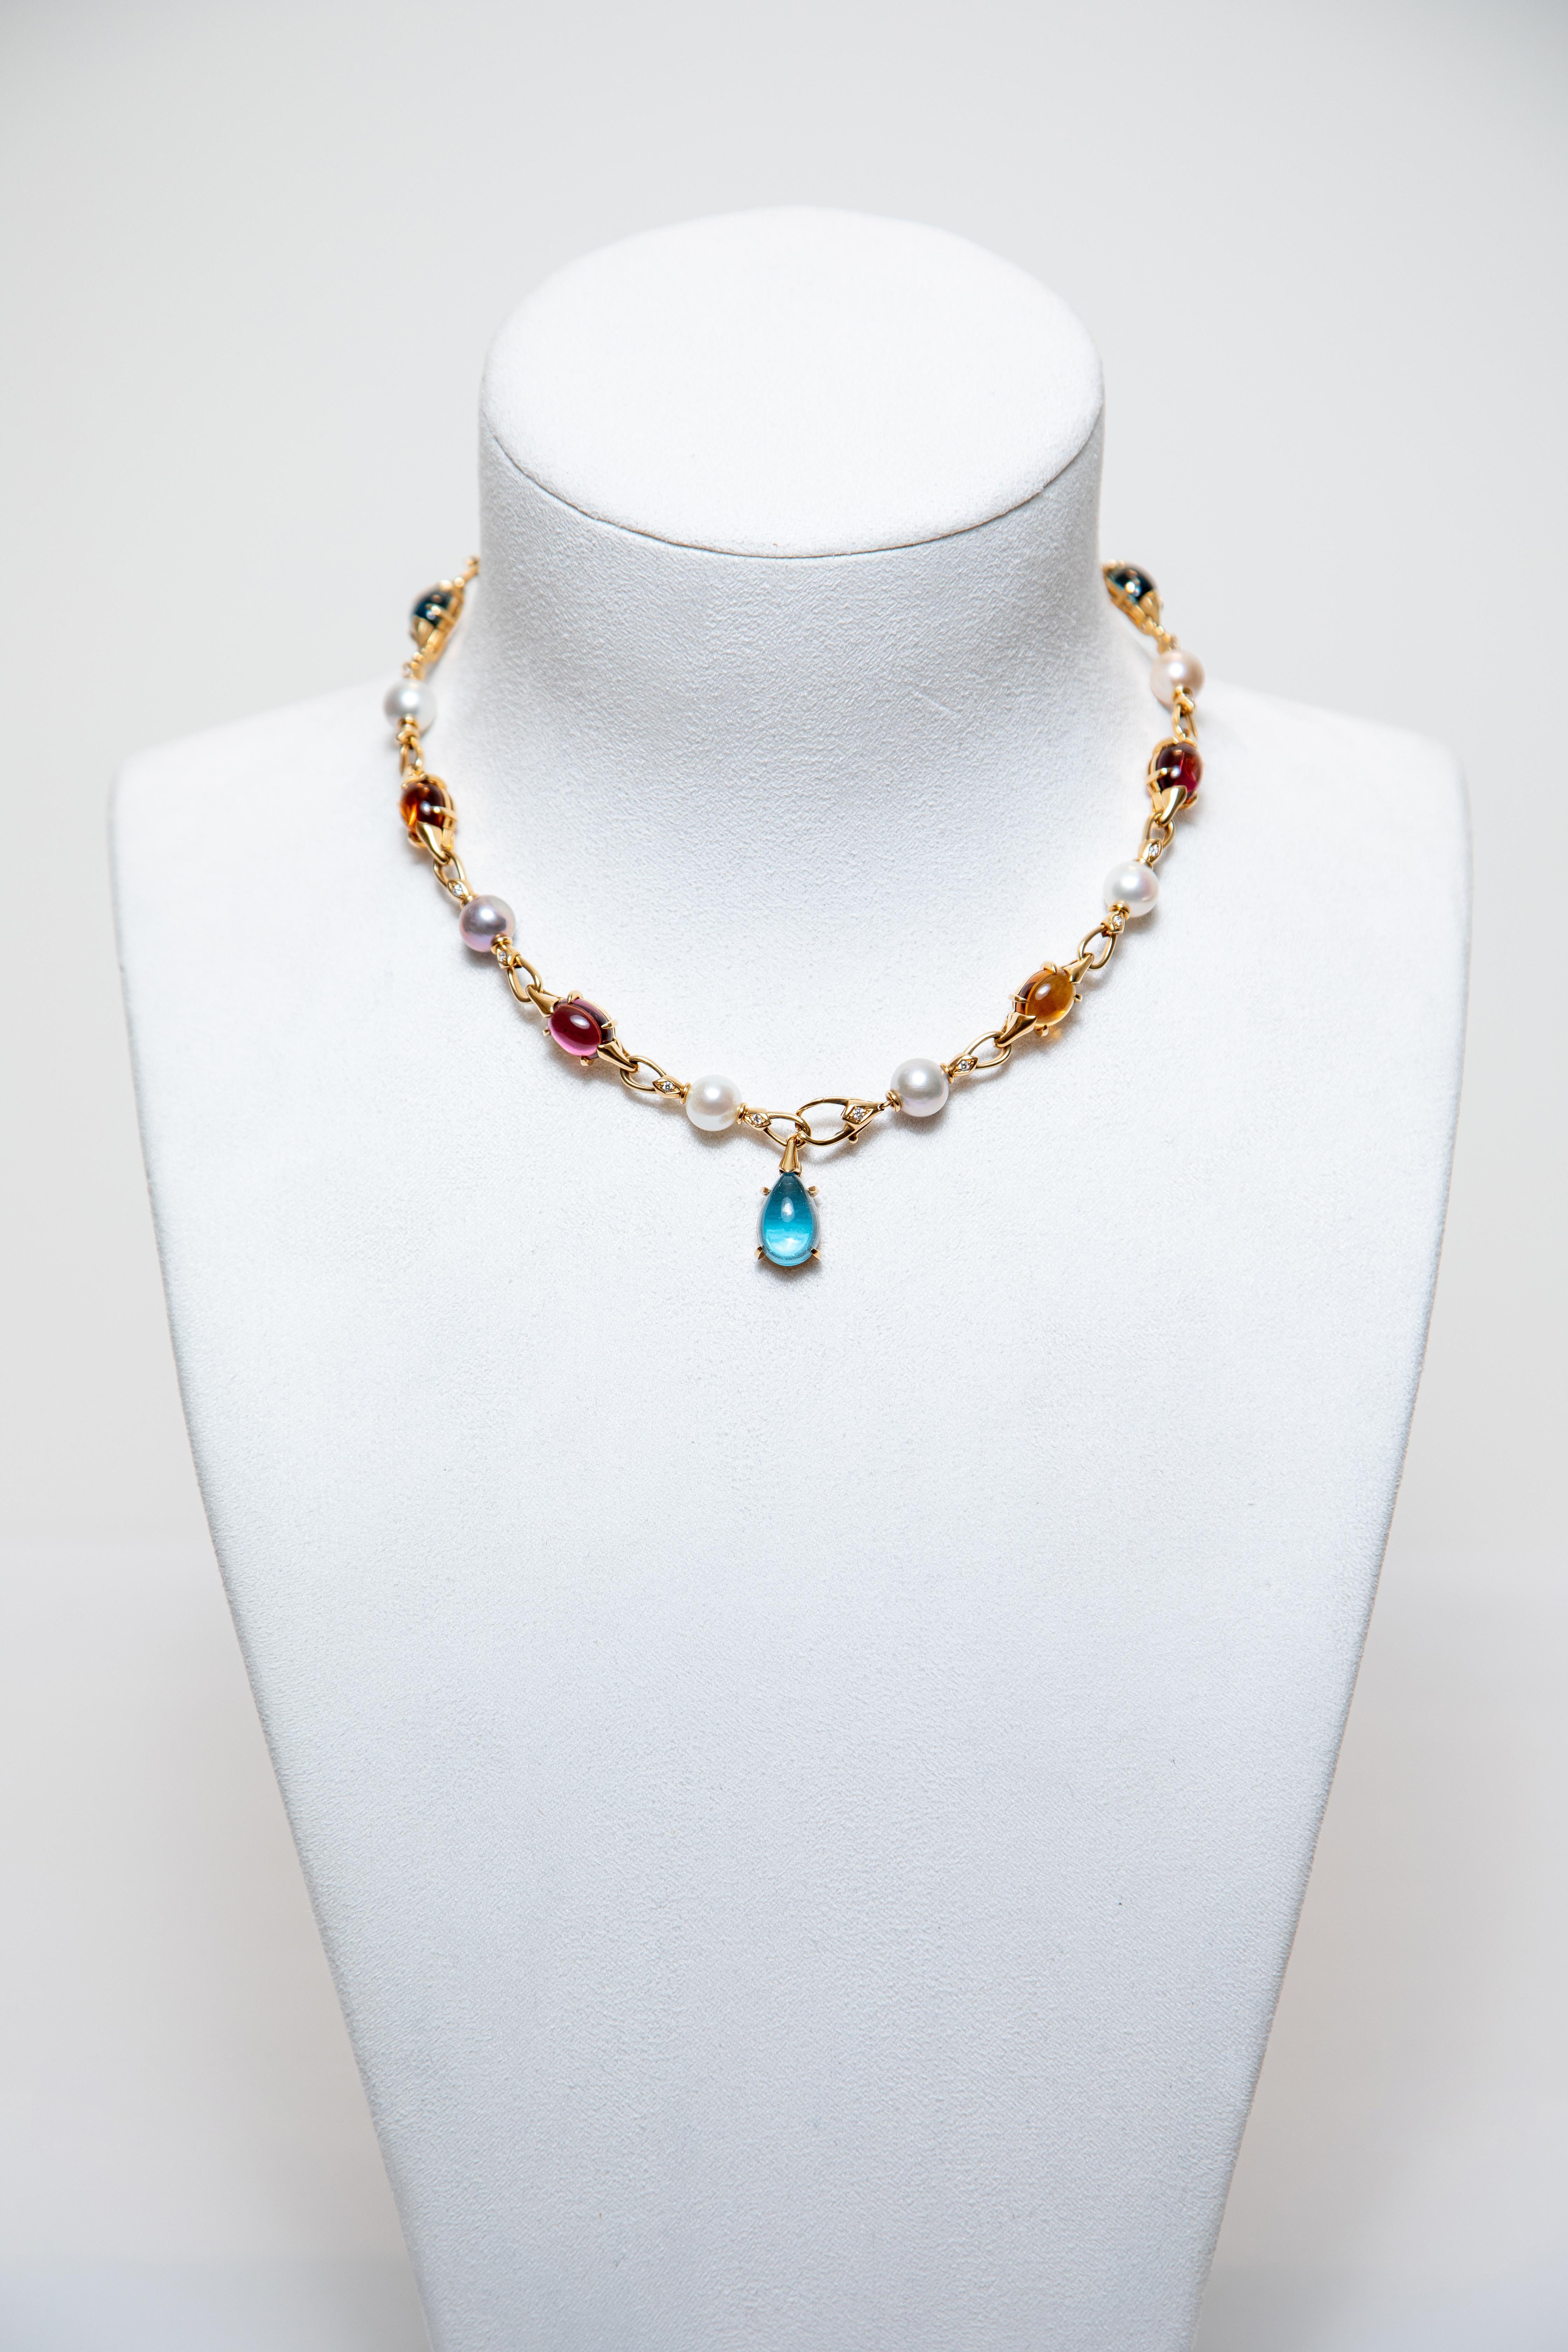 Bulgari Necklace in 18k Yellow Gold with multicolored stones (tourmalines, topazes and citrines) cabochon cut, diamonds and 9 pearls.

Length: 17 inches, 43 cm
Weight: 56.6 g
